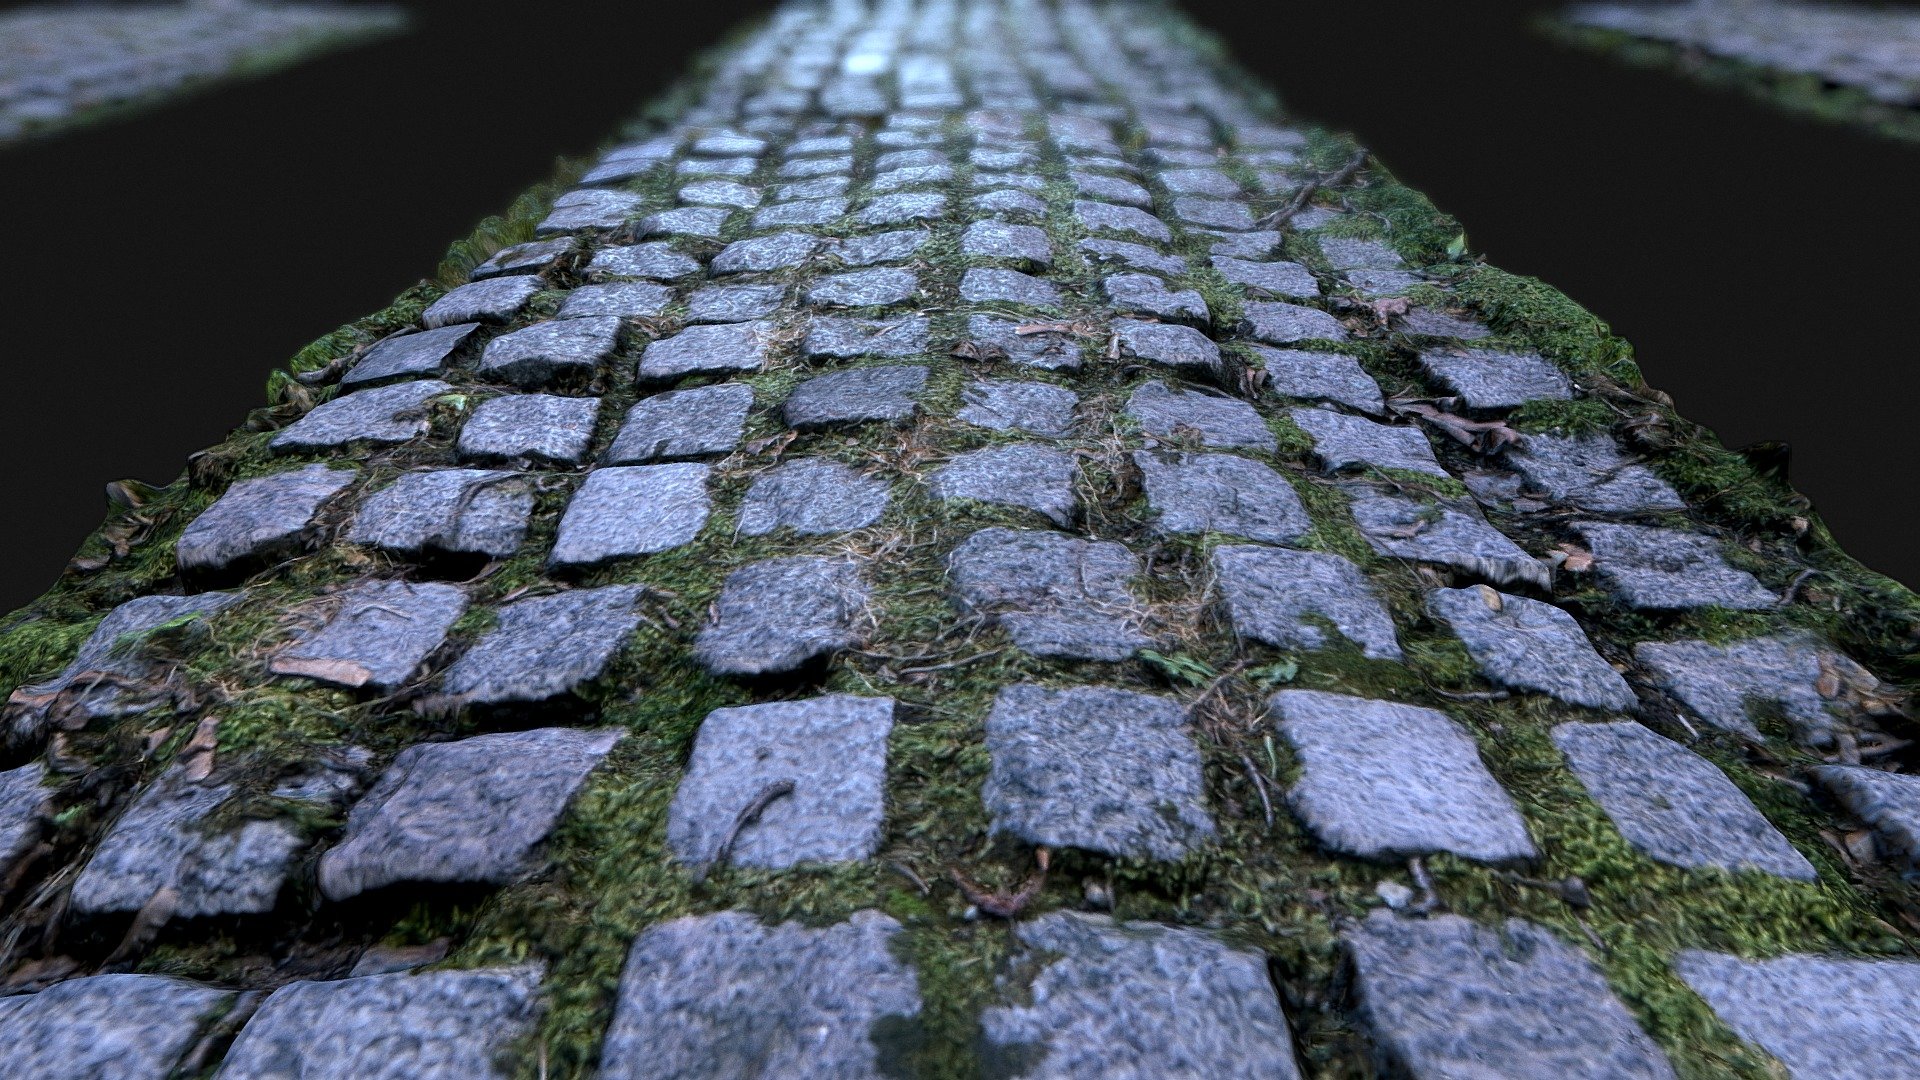 Old Paving Stones Photogrammetry